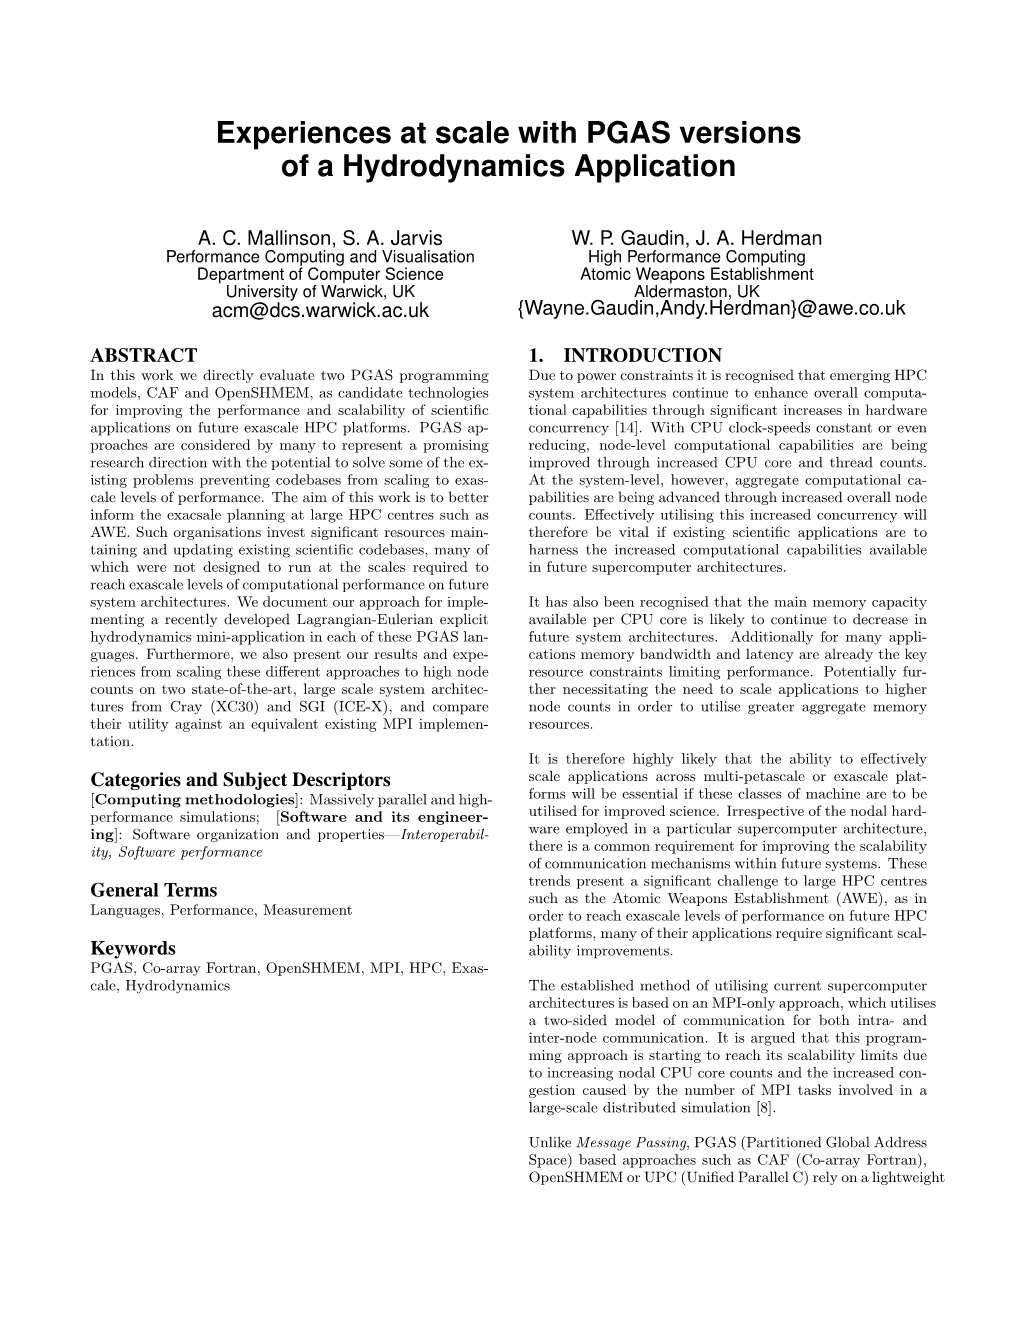 Experiences at Scale with PGAS Versions of a Hydrodynamics Application